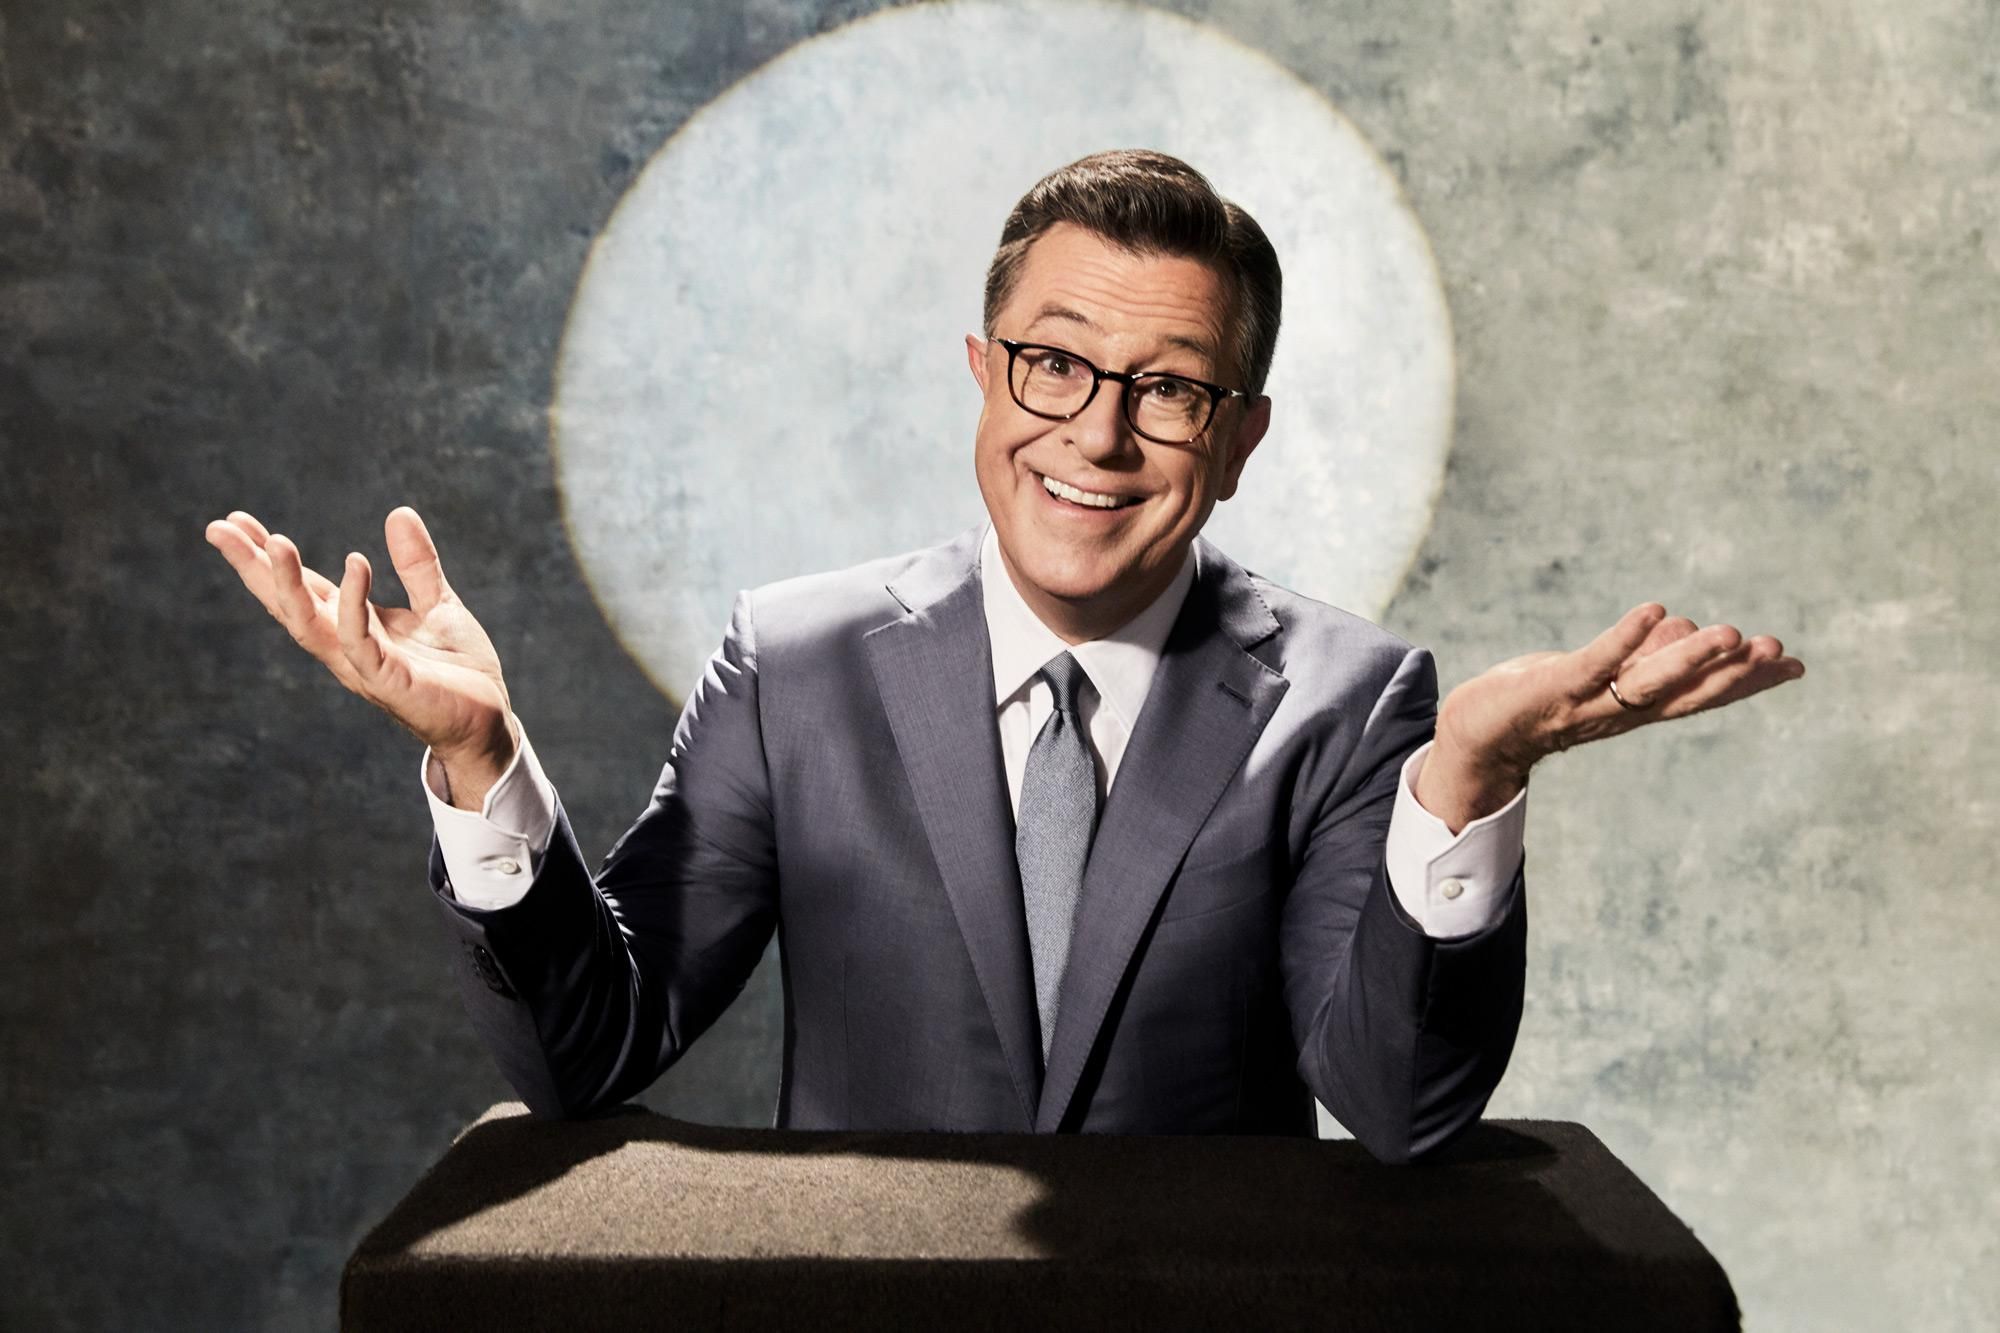 Stephen Colbert smiles broadly as he gestures from a carpeted podium.